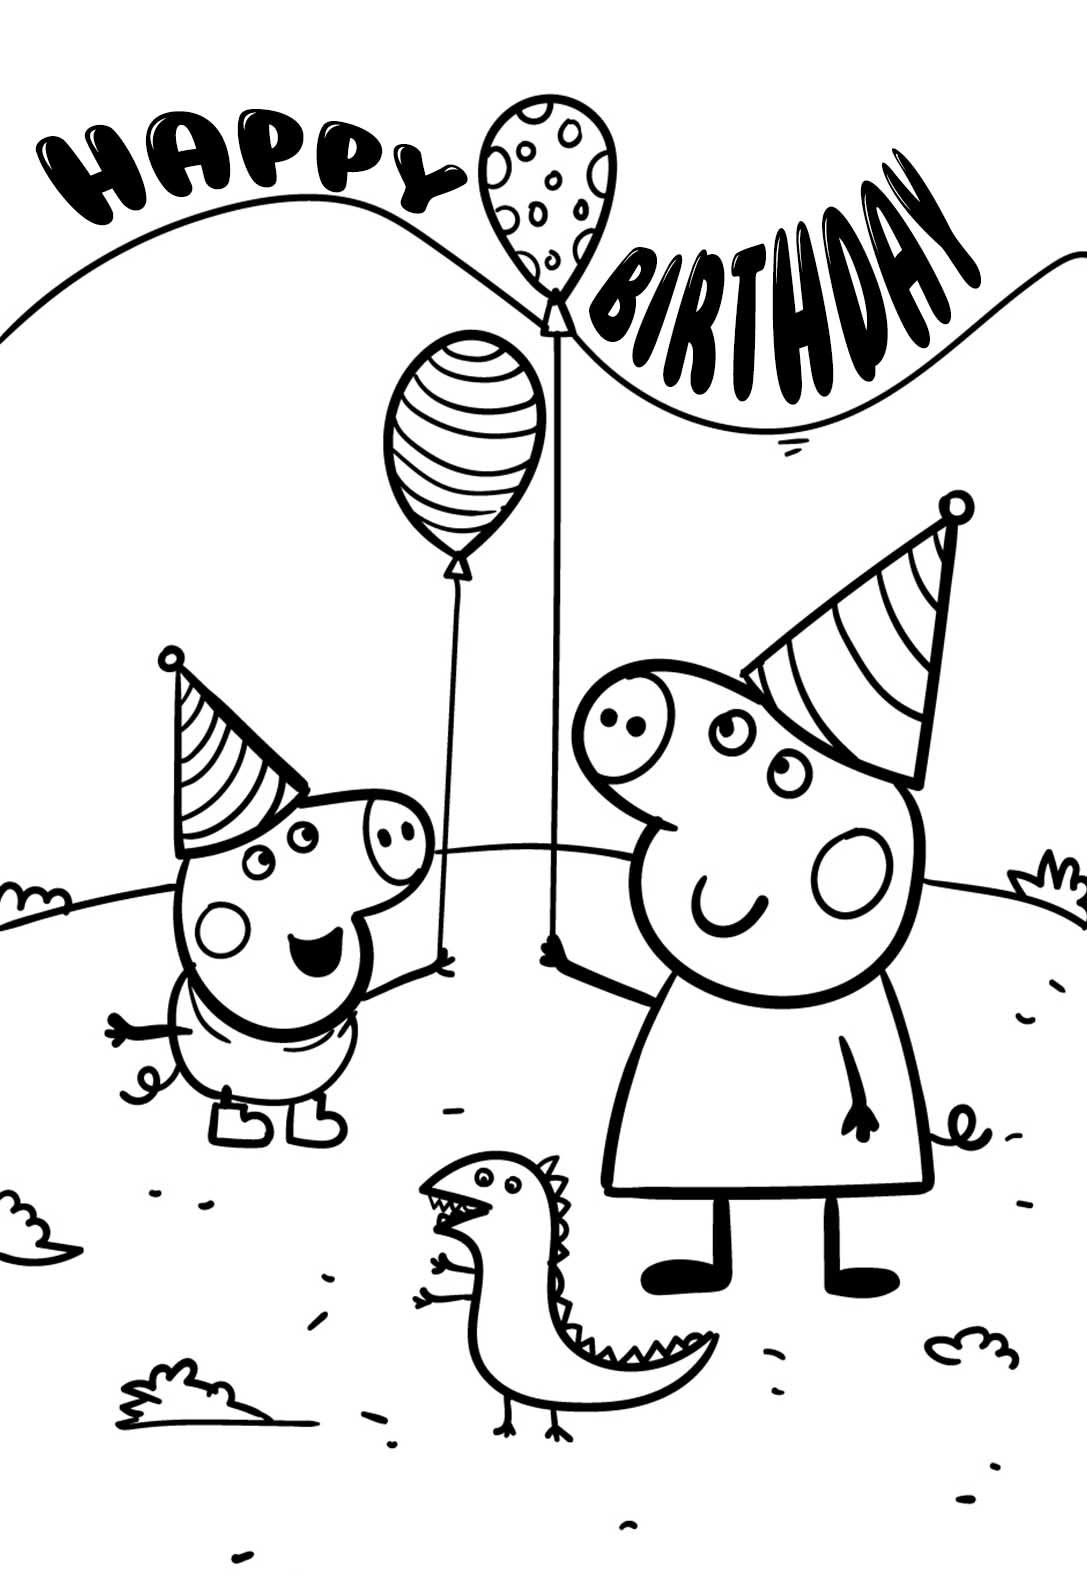 4 Peppa Pig Themed Birthday Coloring Pages & Cards (free ...